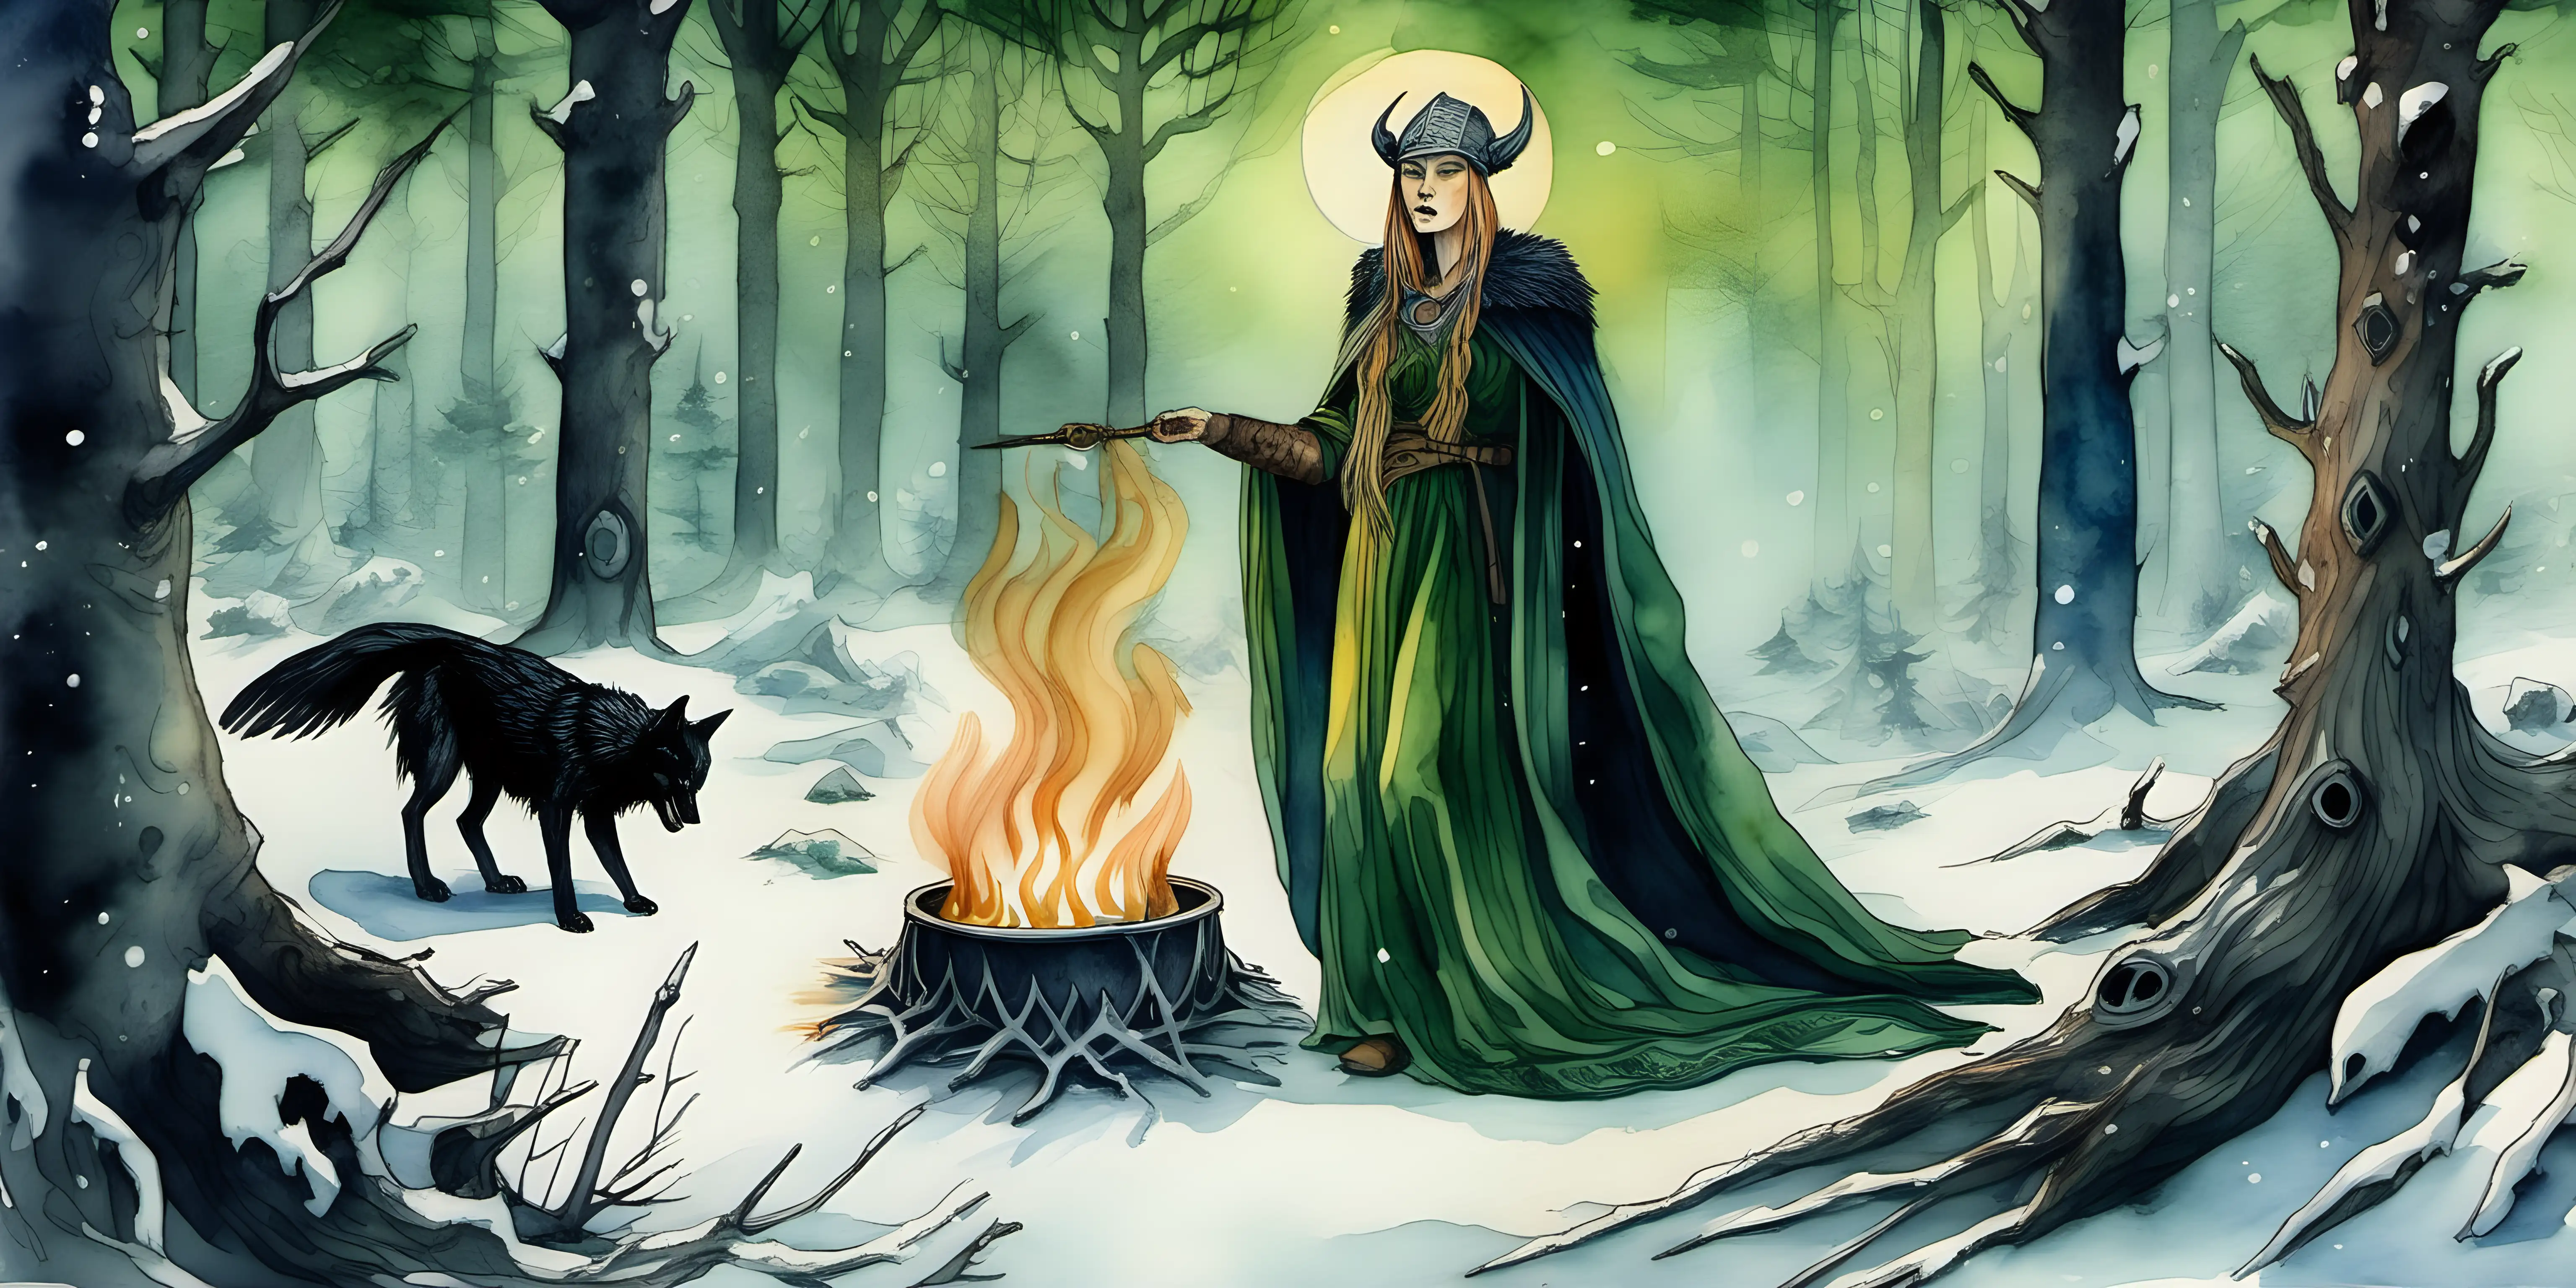 a water colour painting of a viking sorceress , one raven on the ground ,she is in an ancient green pine tree forest with  a wolf beside  her in the snow,  She has a cauldron on the fire